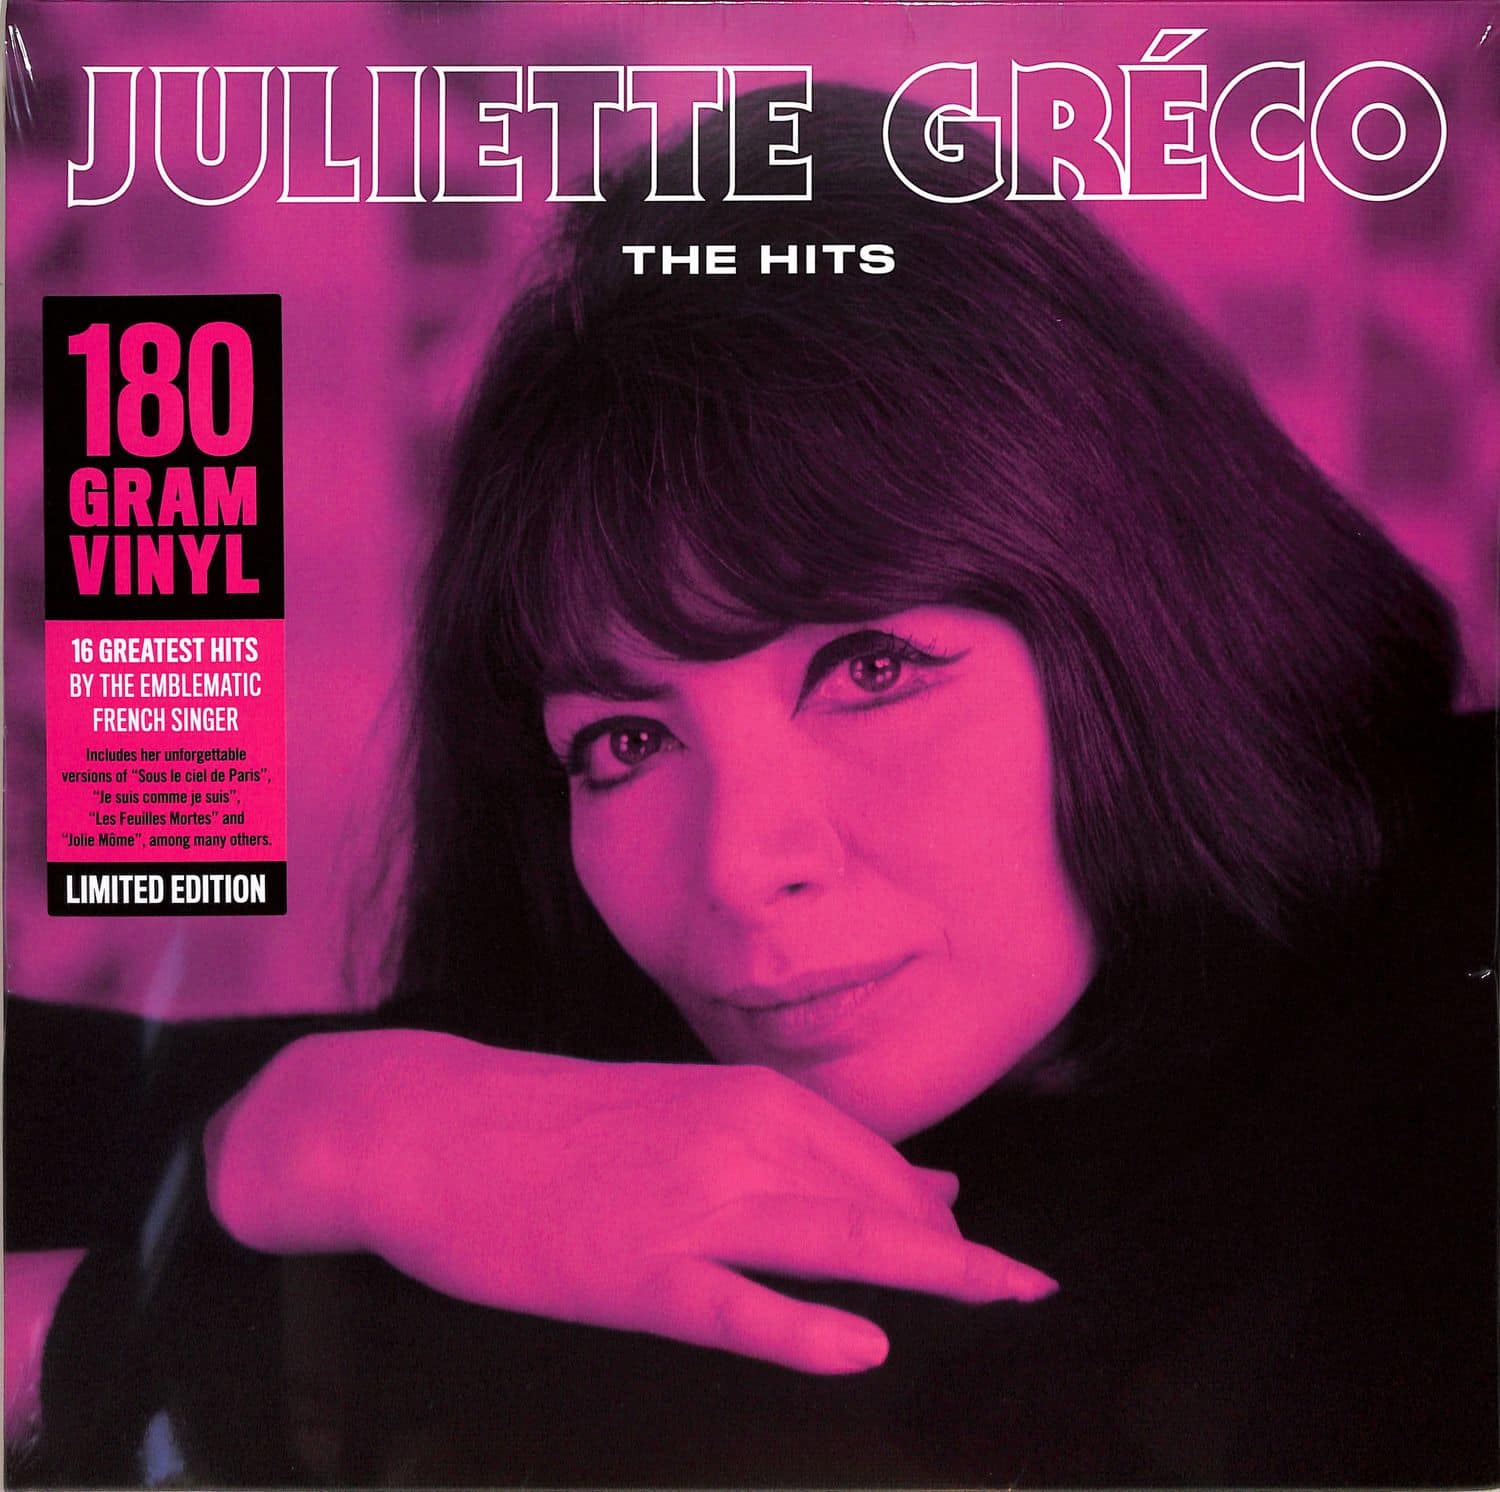 Juliette Greco - THE HITS 